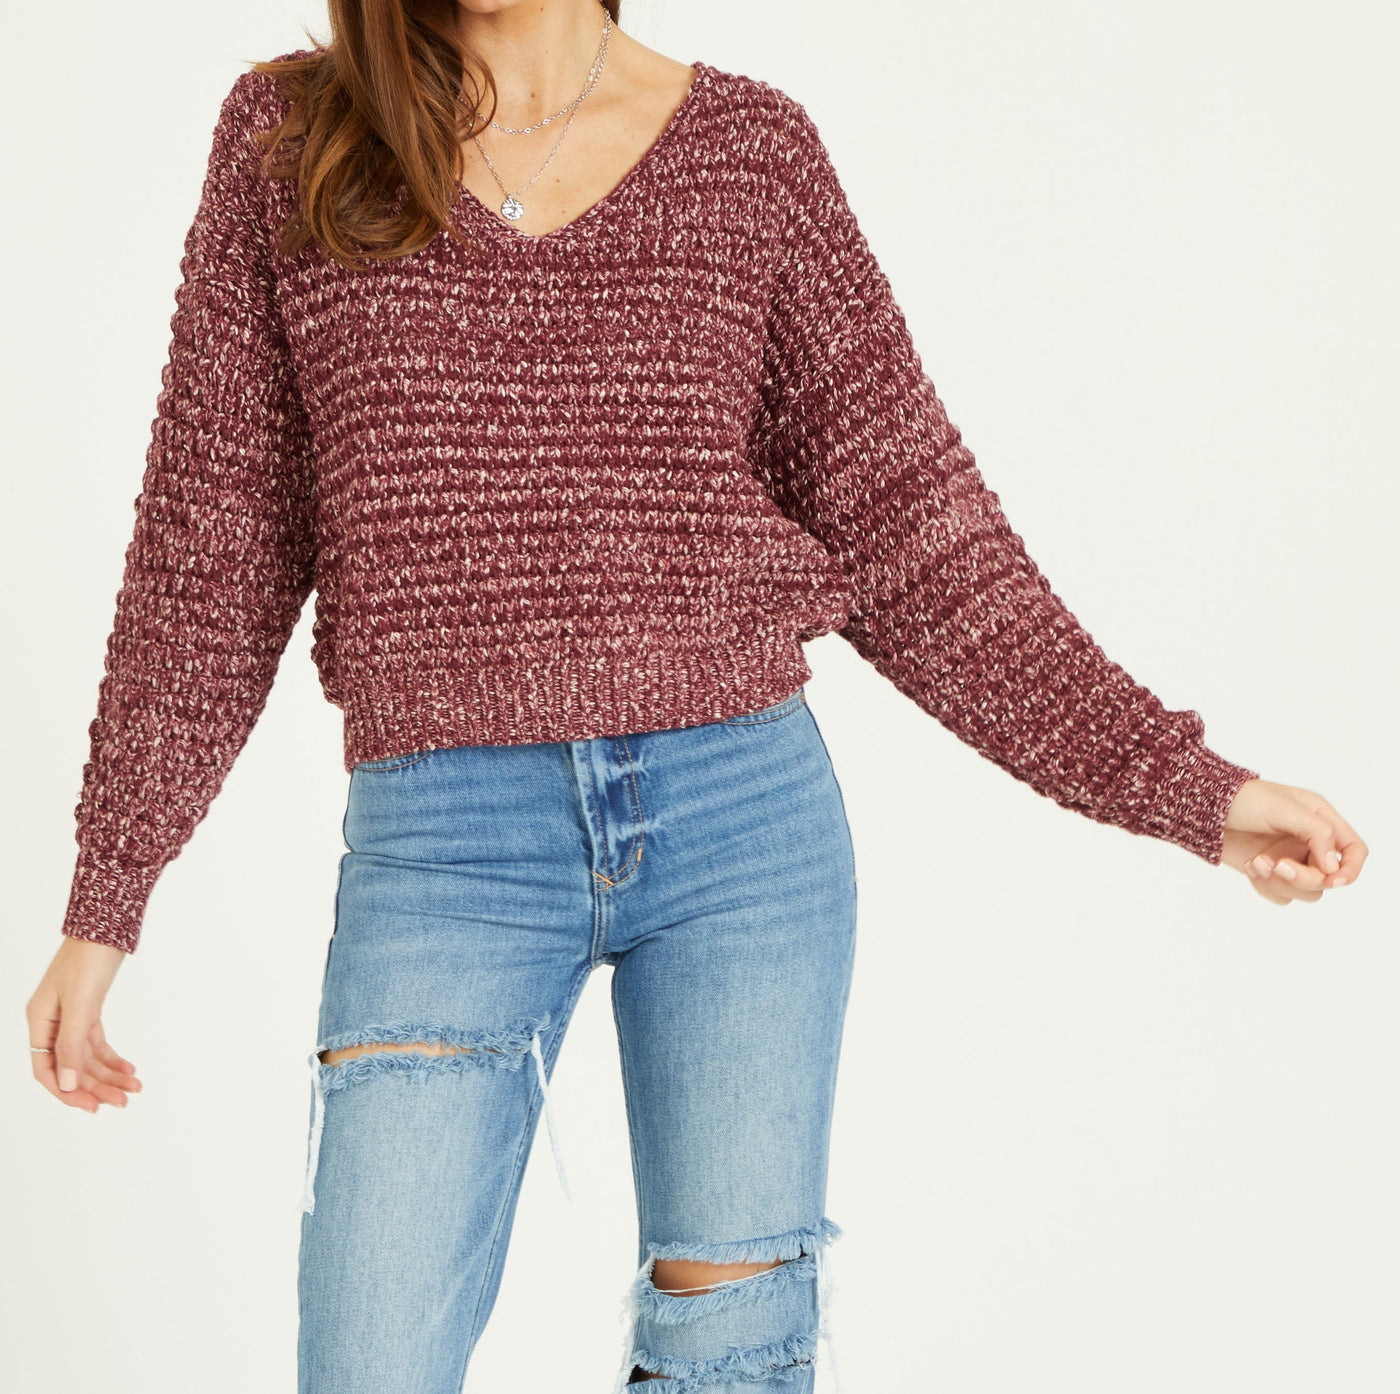 LEXIE ROSEWOOD SWEATER